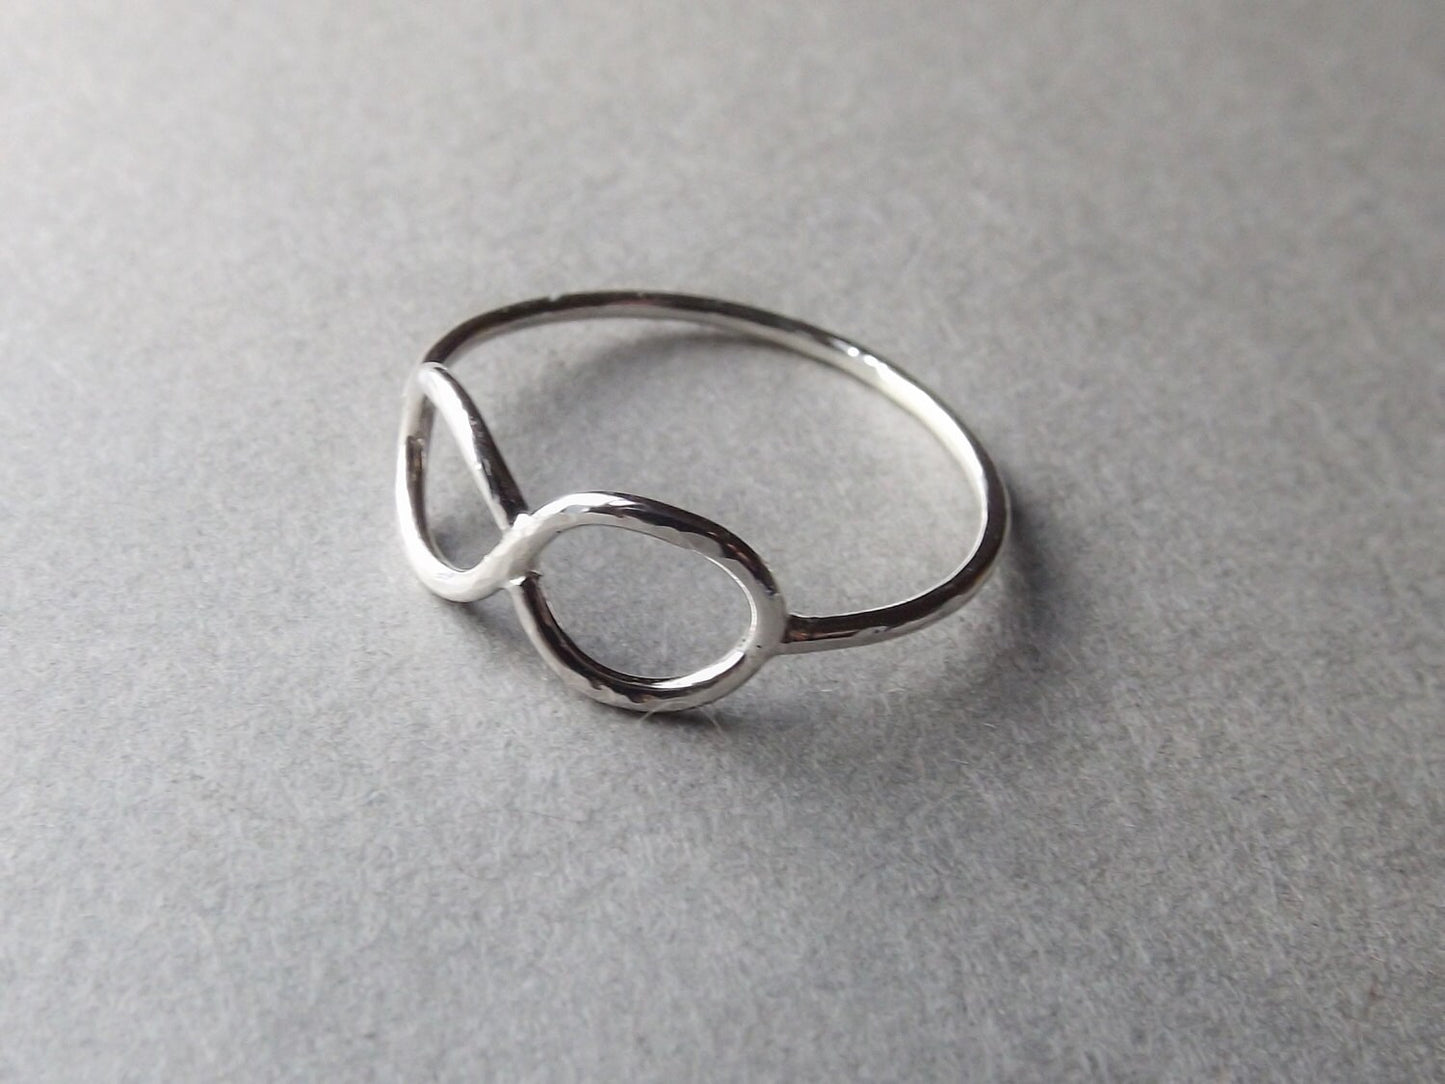 Minimalist Infinity Ring, Forever Ring, Stacking Ring, Inifinity Ring, Open Infinity Ring, Eternity Ring, Artsy Infinity Ring, Gift